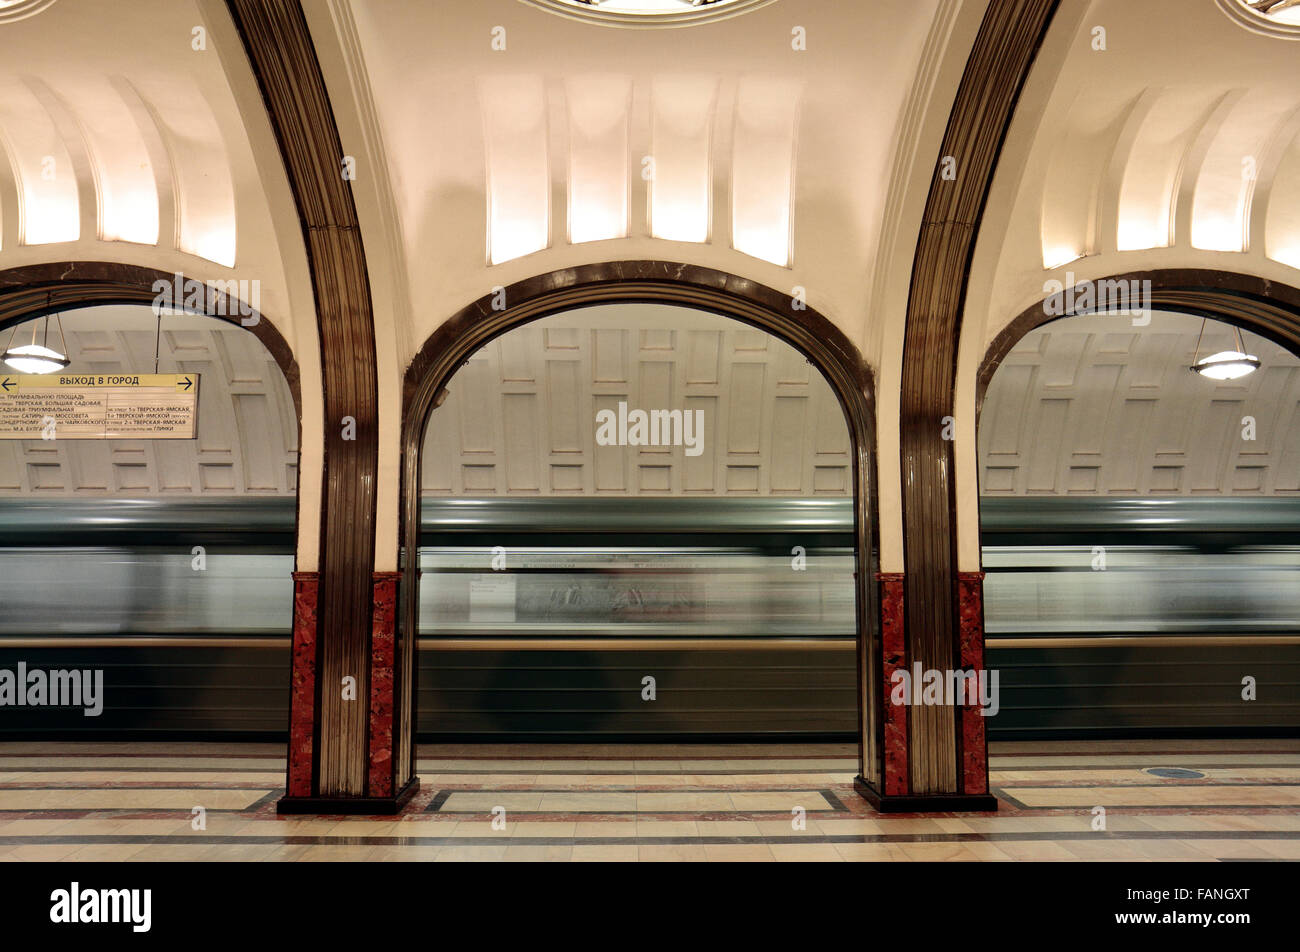 A Moscow Metro train train pulling away from an empty platform on the Moscow Metro, Moscow, Russia. Stock Photo